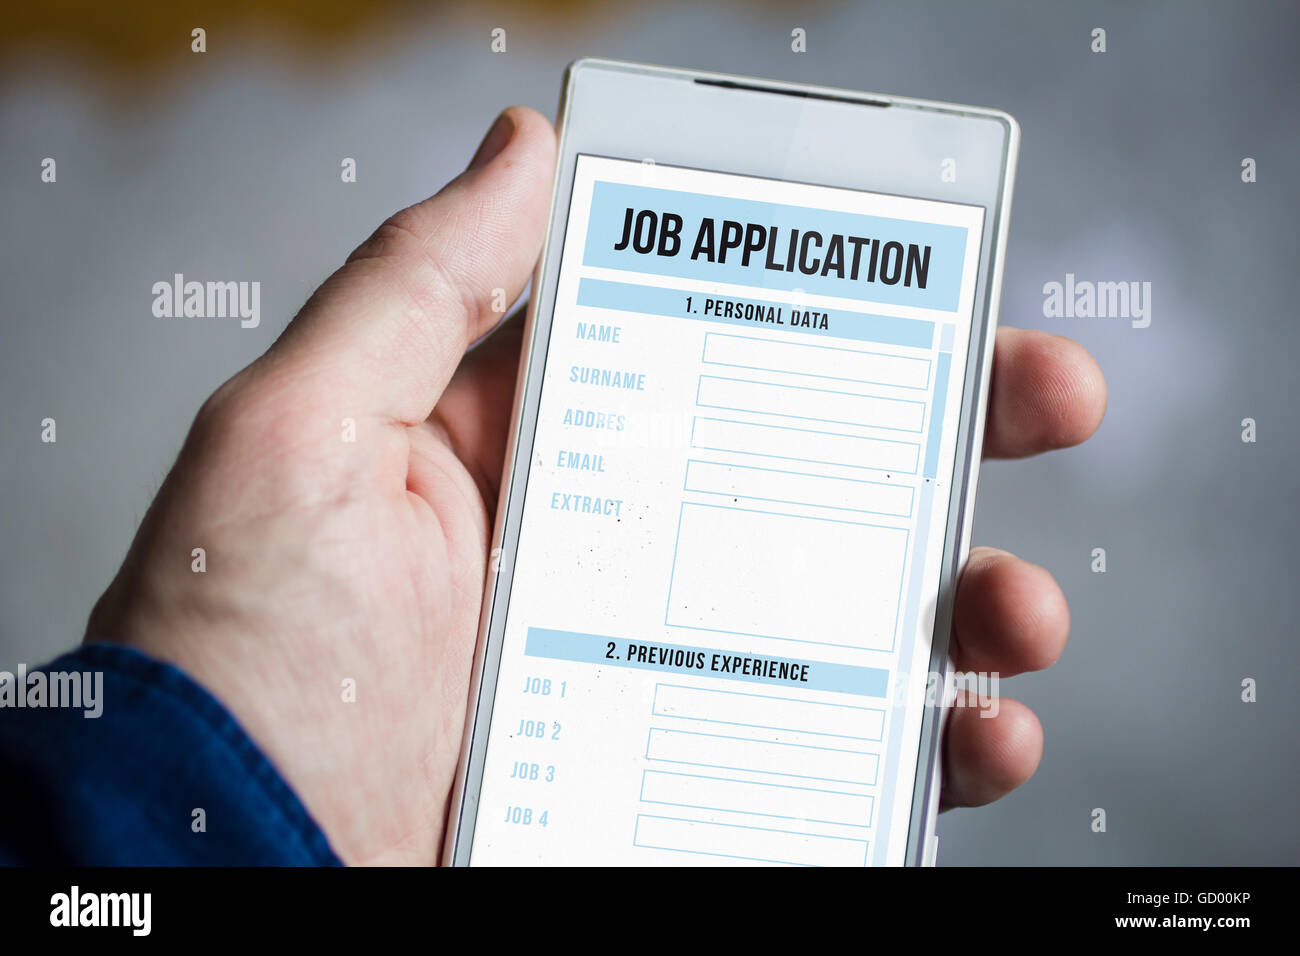 man hand holding job application smartphone. All screen graphics are made up. Stock Photo